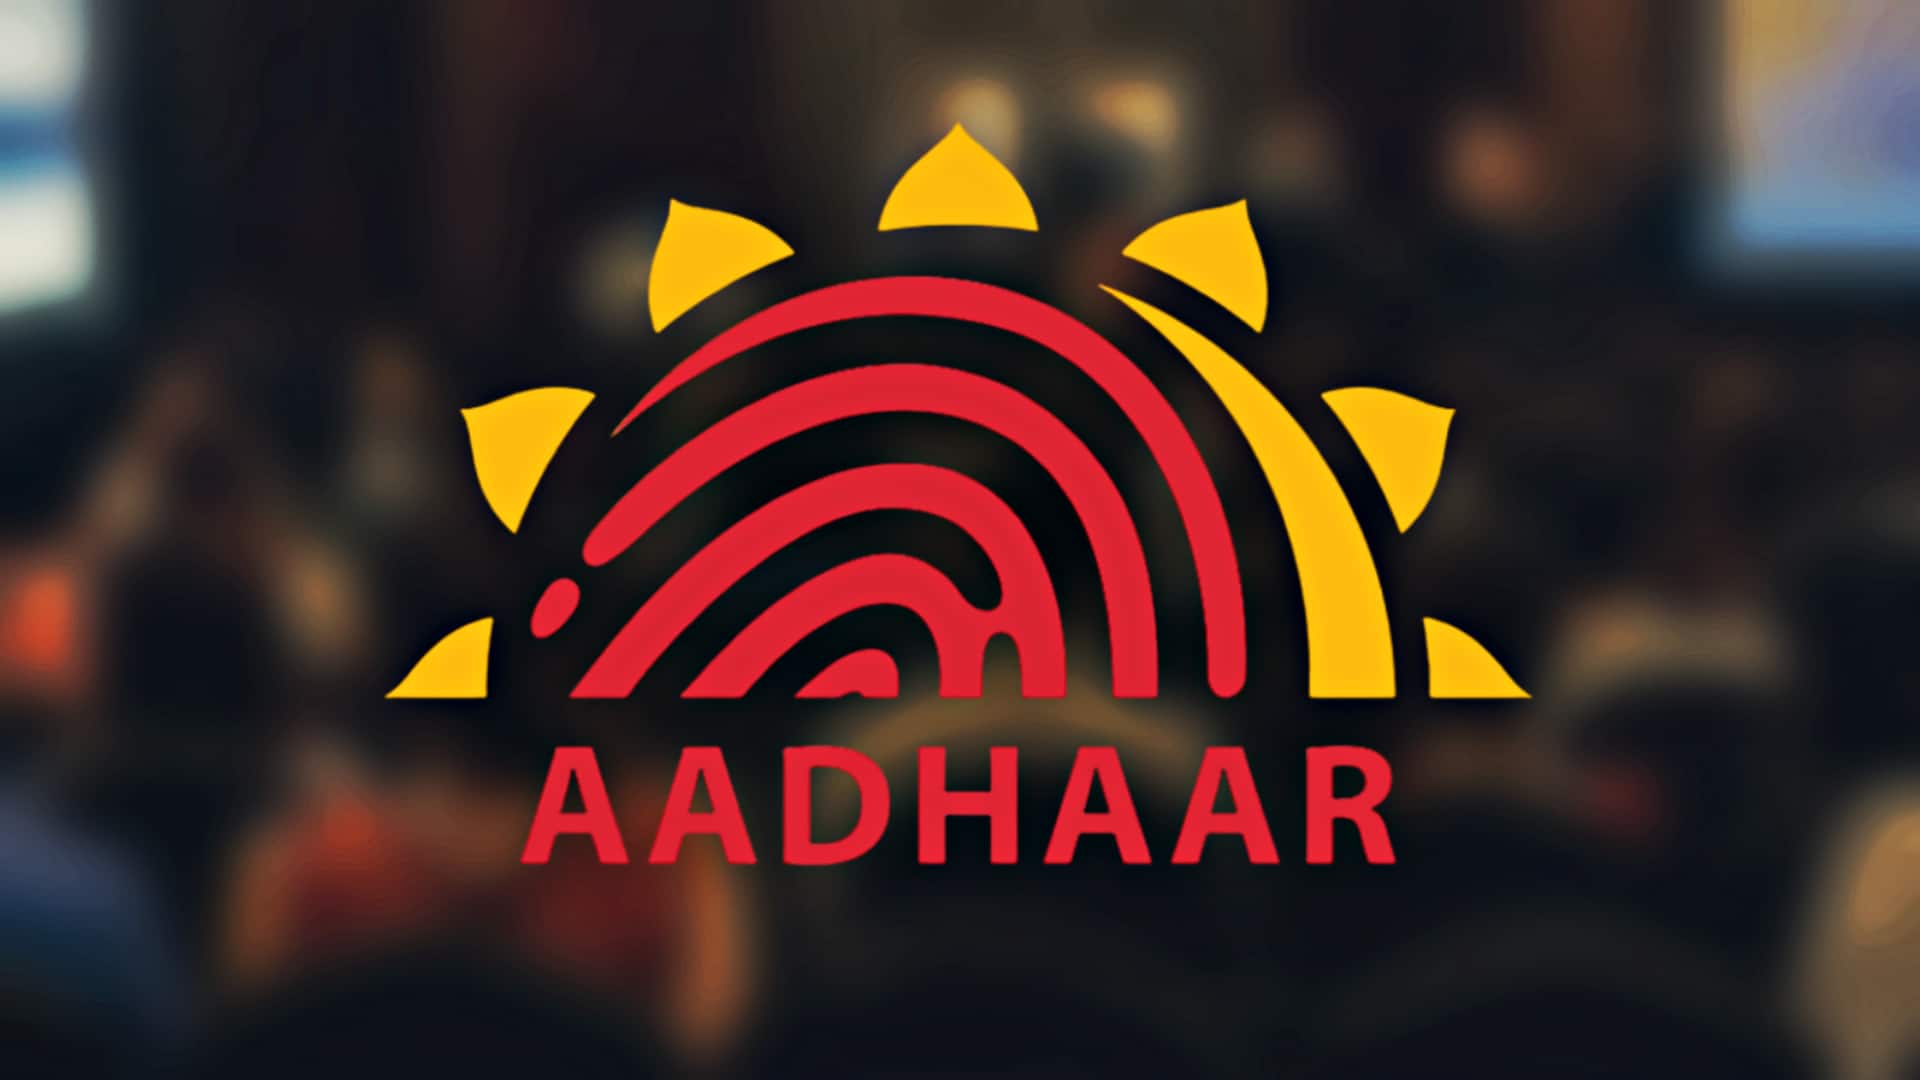 Lost your Aadhaar card? Here's what you need to do